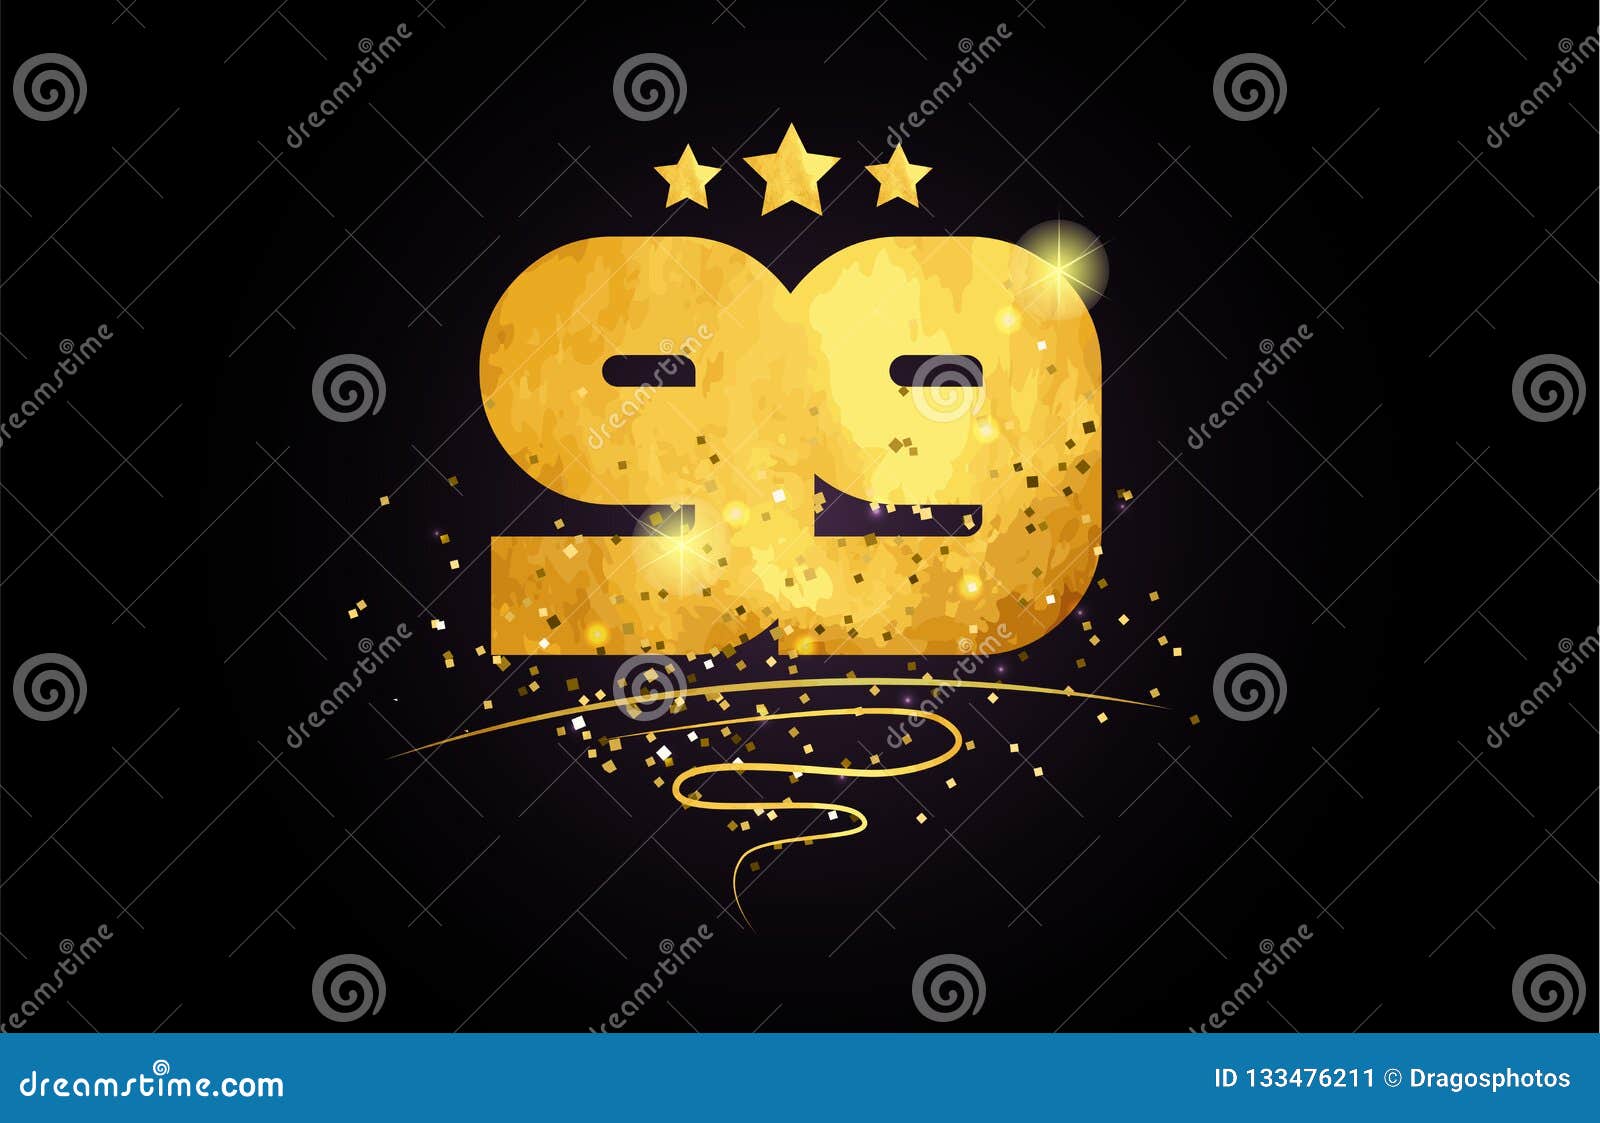 99 Number Icon Design with Golden Star and Glitter Stock Vector ...